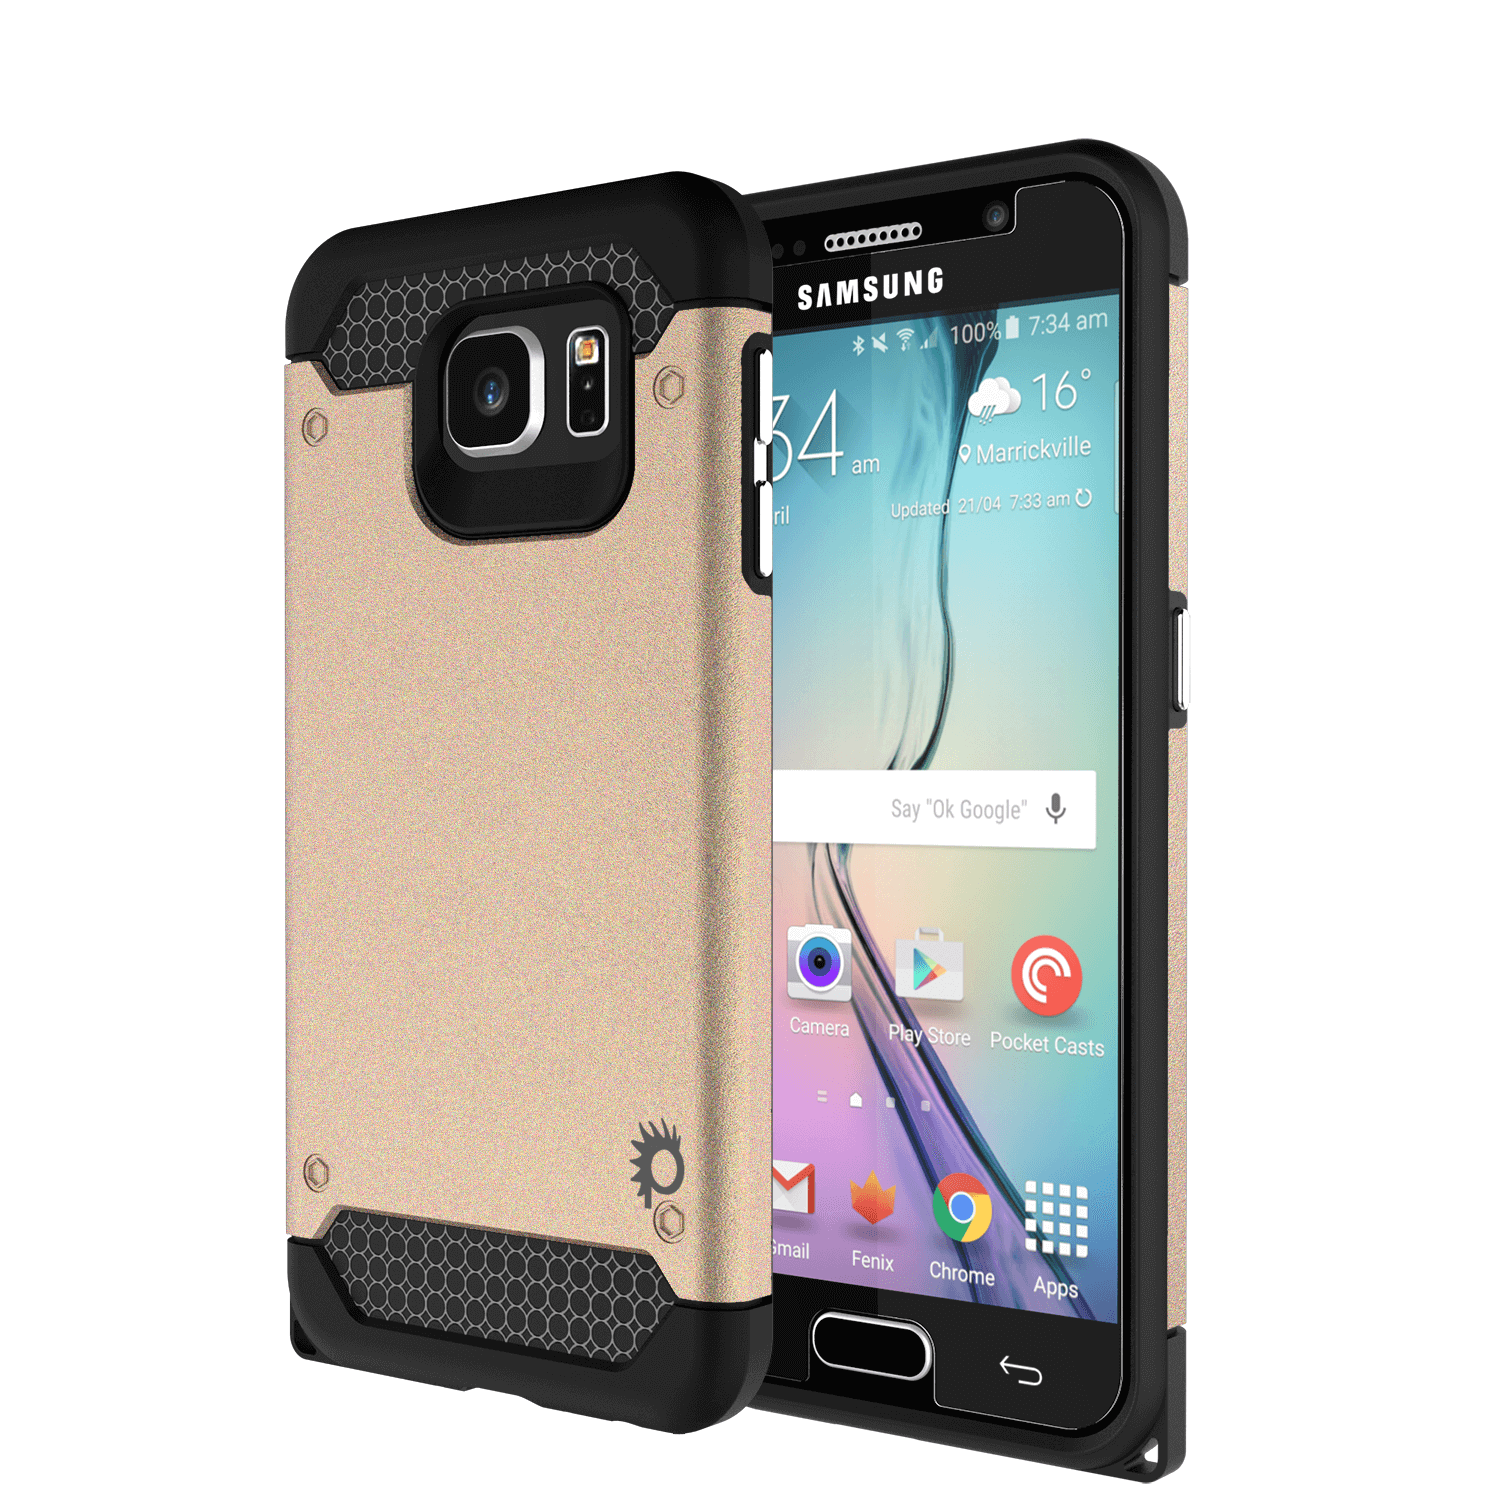 Galaxy s6 Case PunkCase Galactic Gold Series Slim Armor Soft Cover Case w/ Tempered Glass